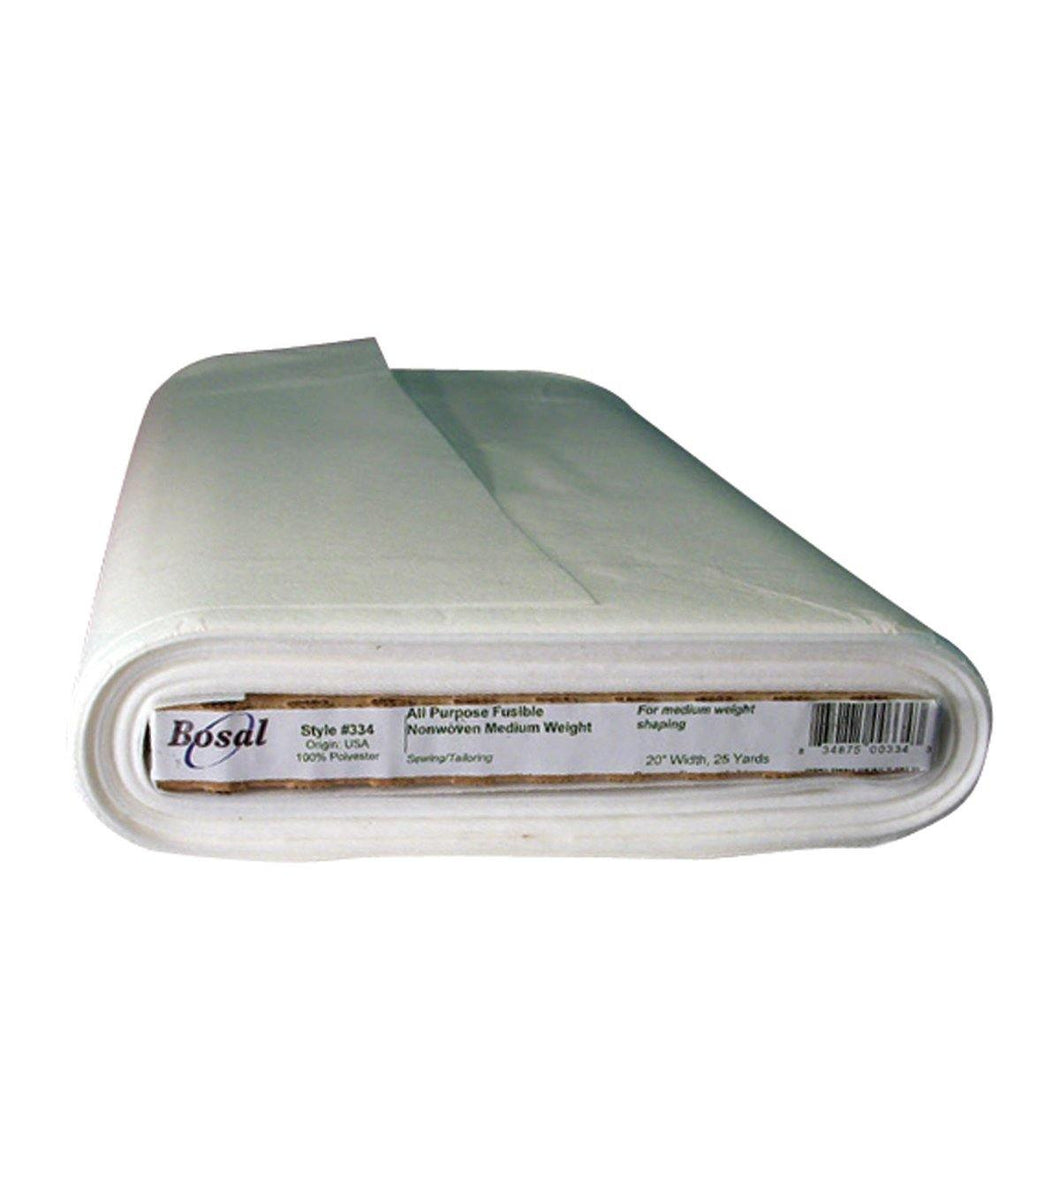 Bosal 316 Medium Weight Non-woven Fusible Interfacing BY THE YARD - Dreaming of the Sea Fabrics